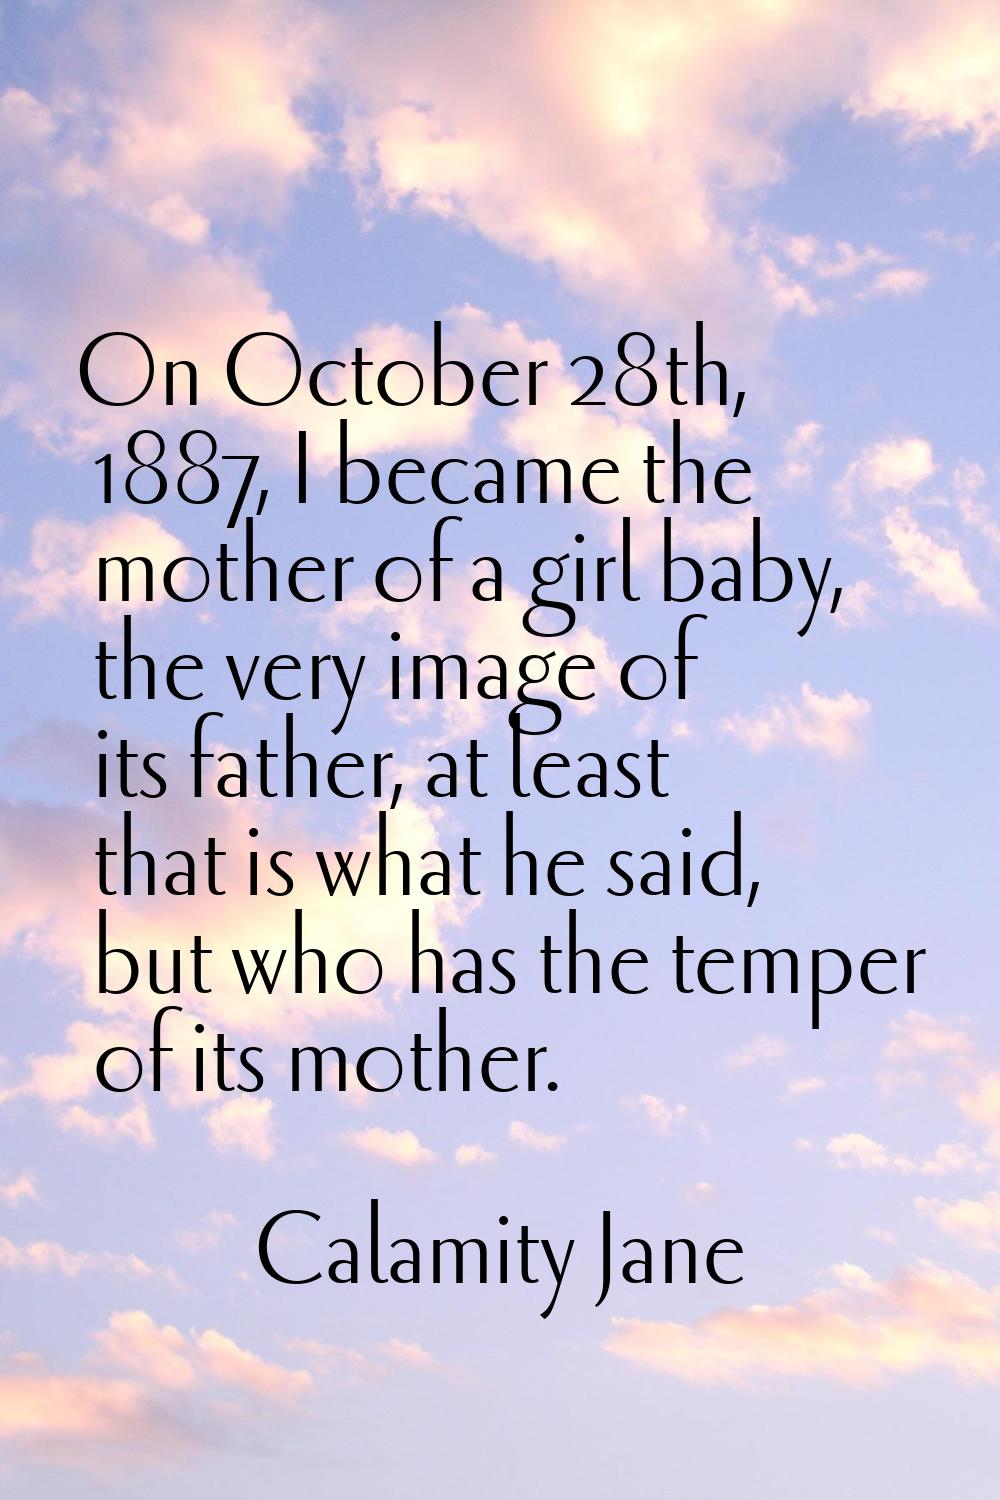 On October 28th, 1887, I became the mother of a girl baby, the very image of its father, at least t